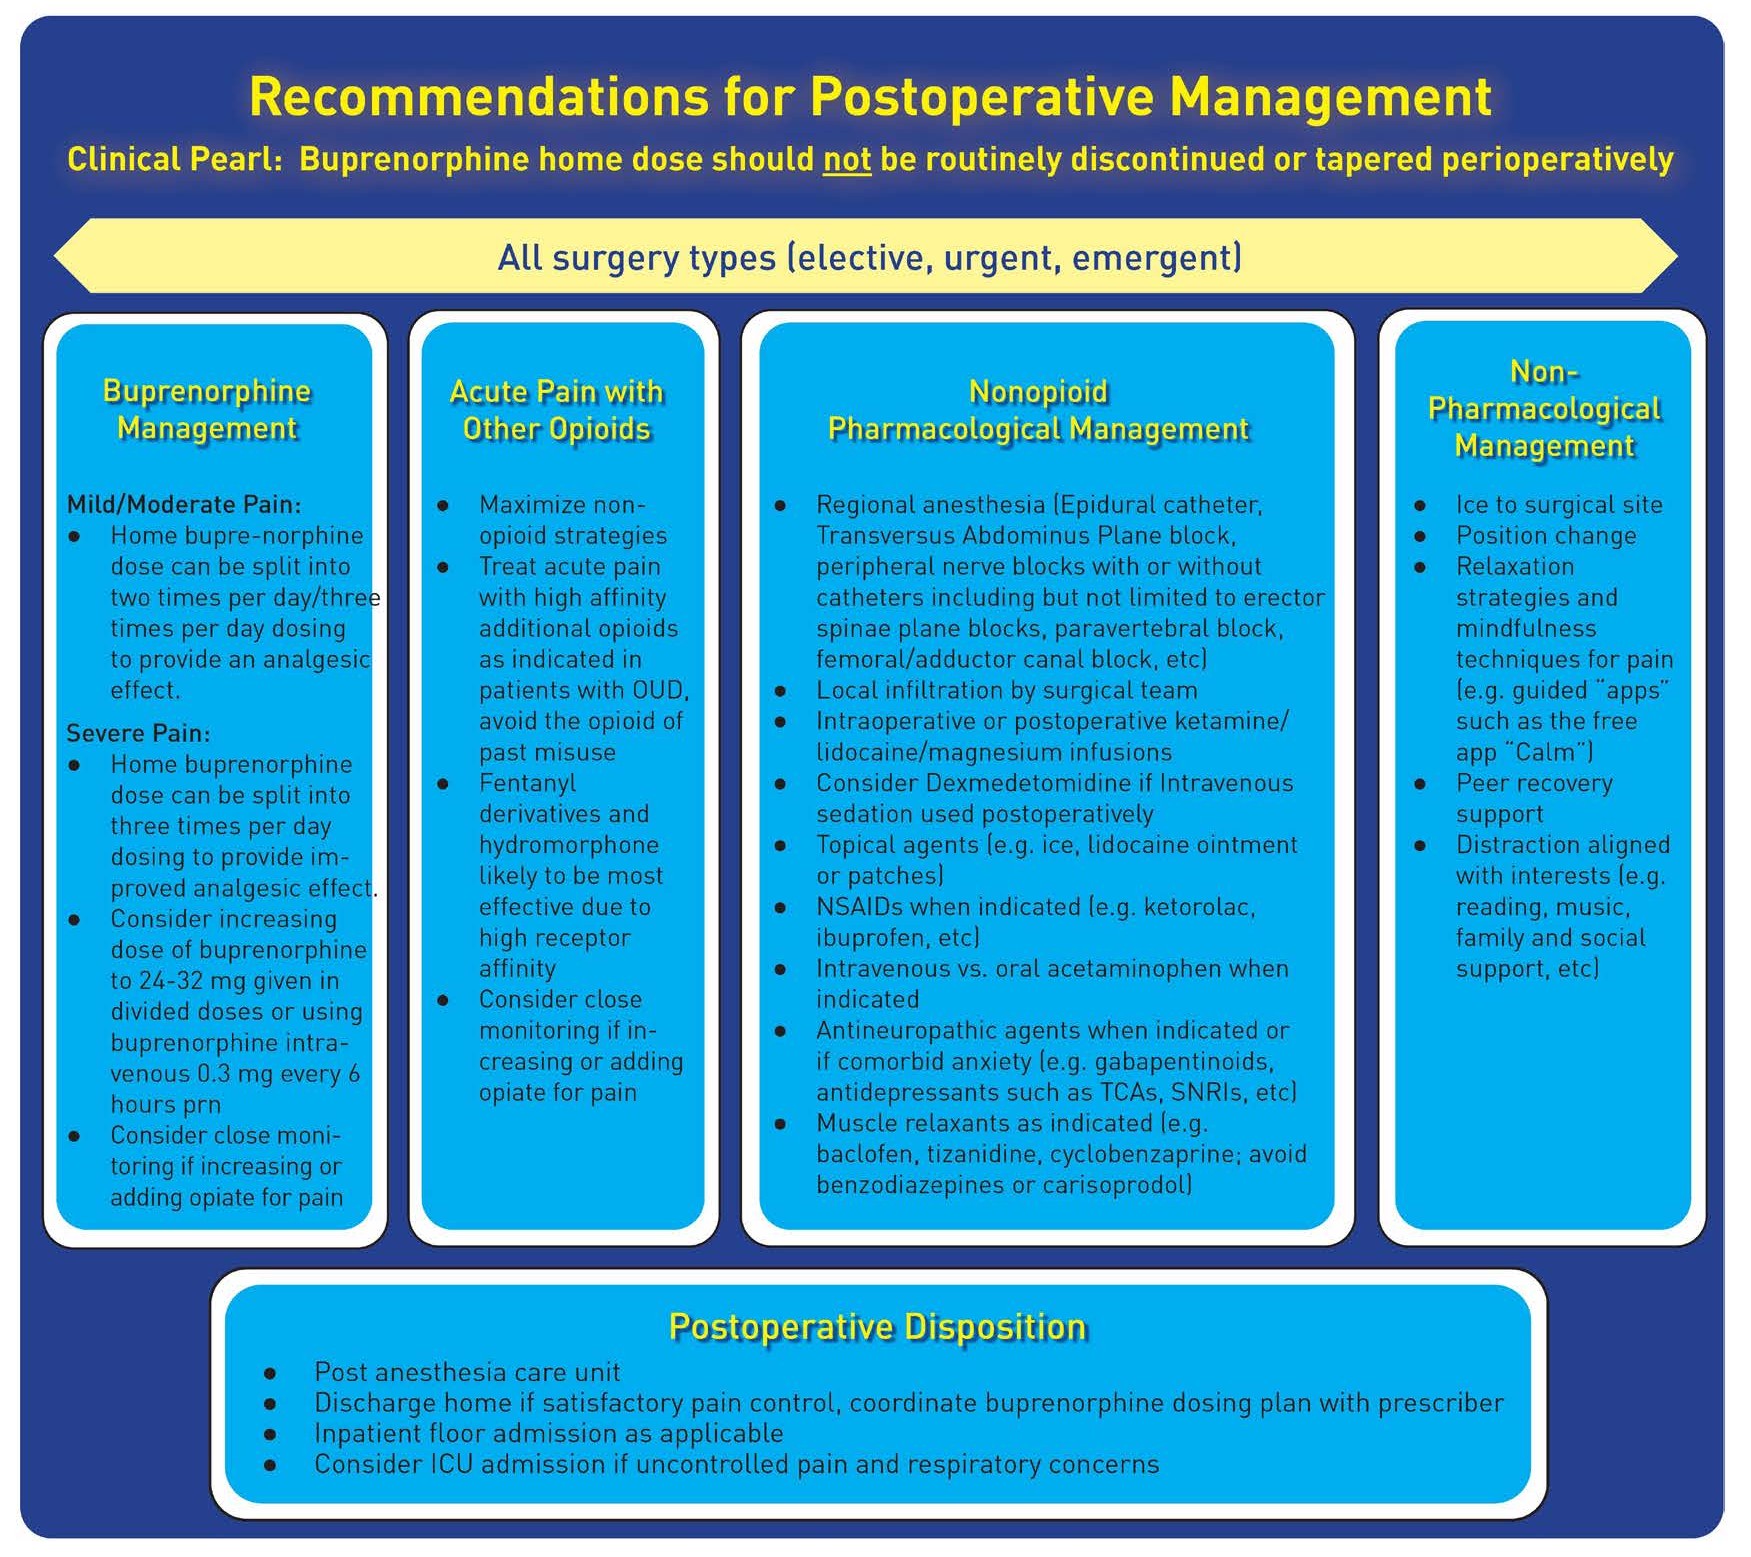 Figure 1. Recommendations for Postoperative Management With Buprenorphine and Other Options